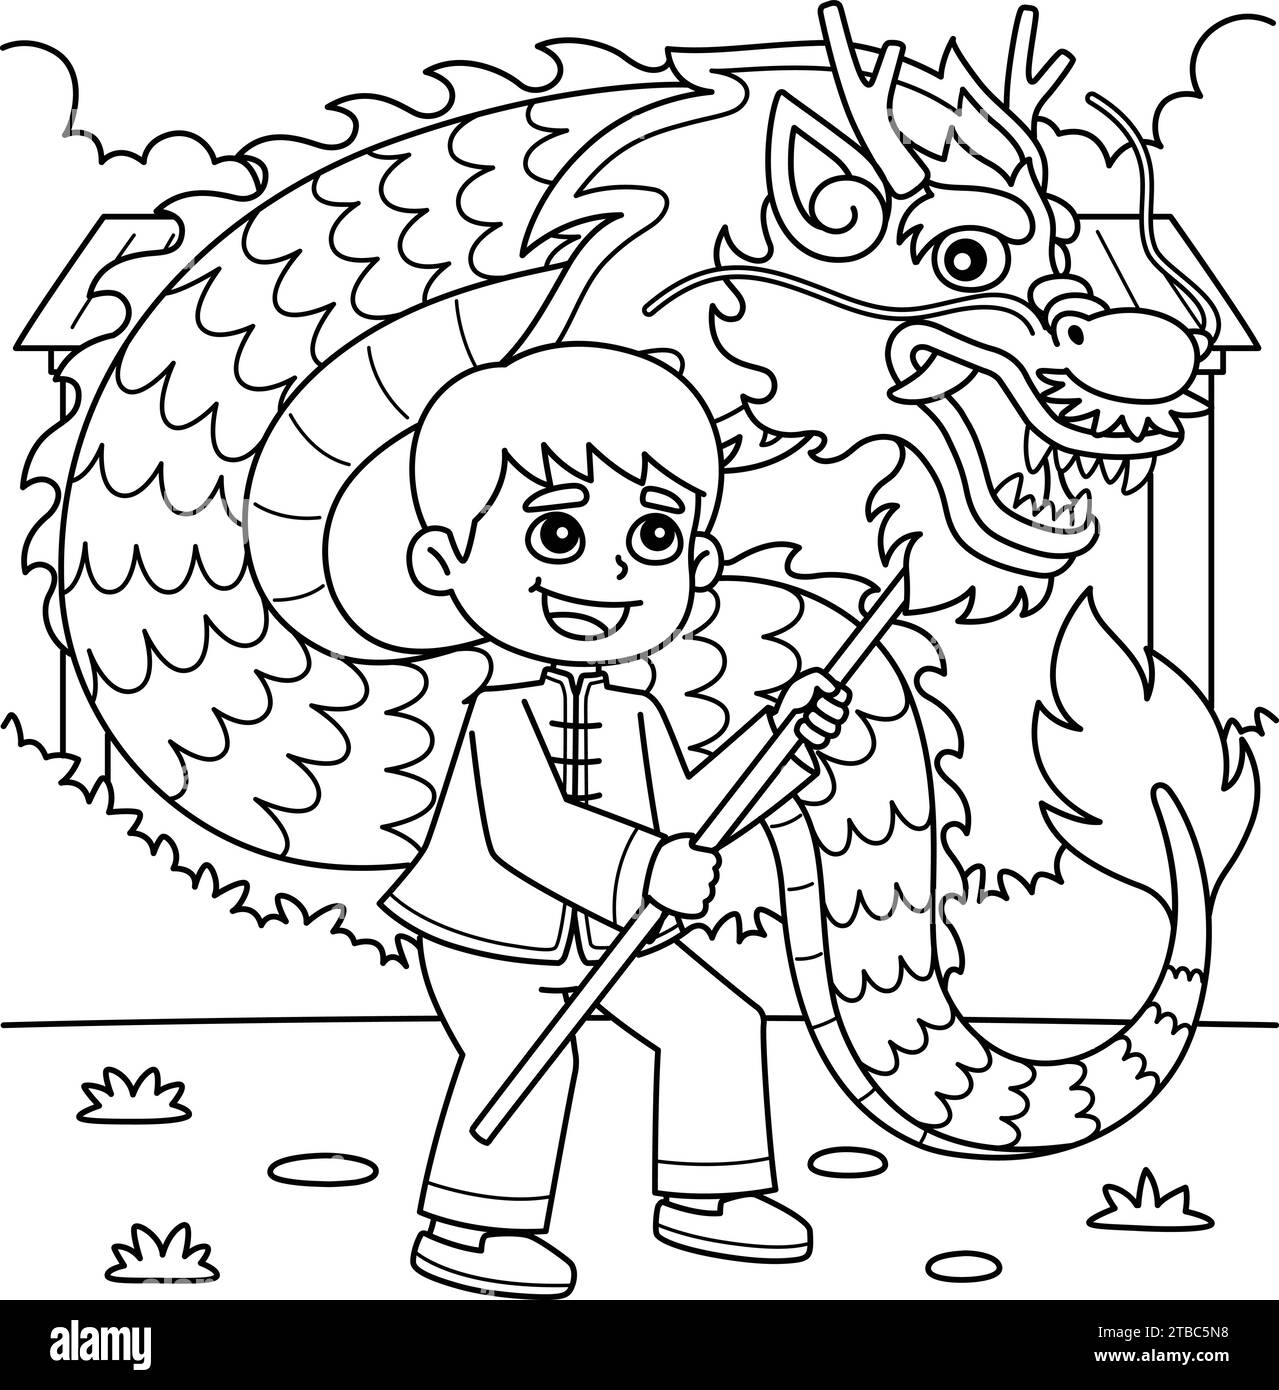 Year of the Dragon Dance Kids Coloring Page  Stock Vector